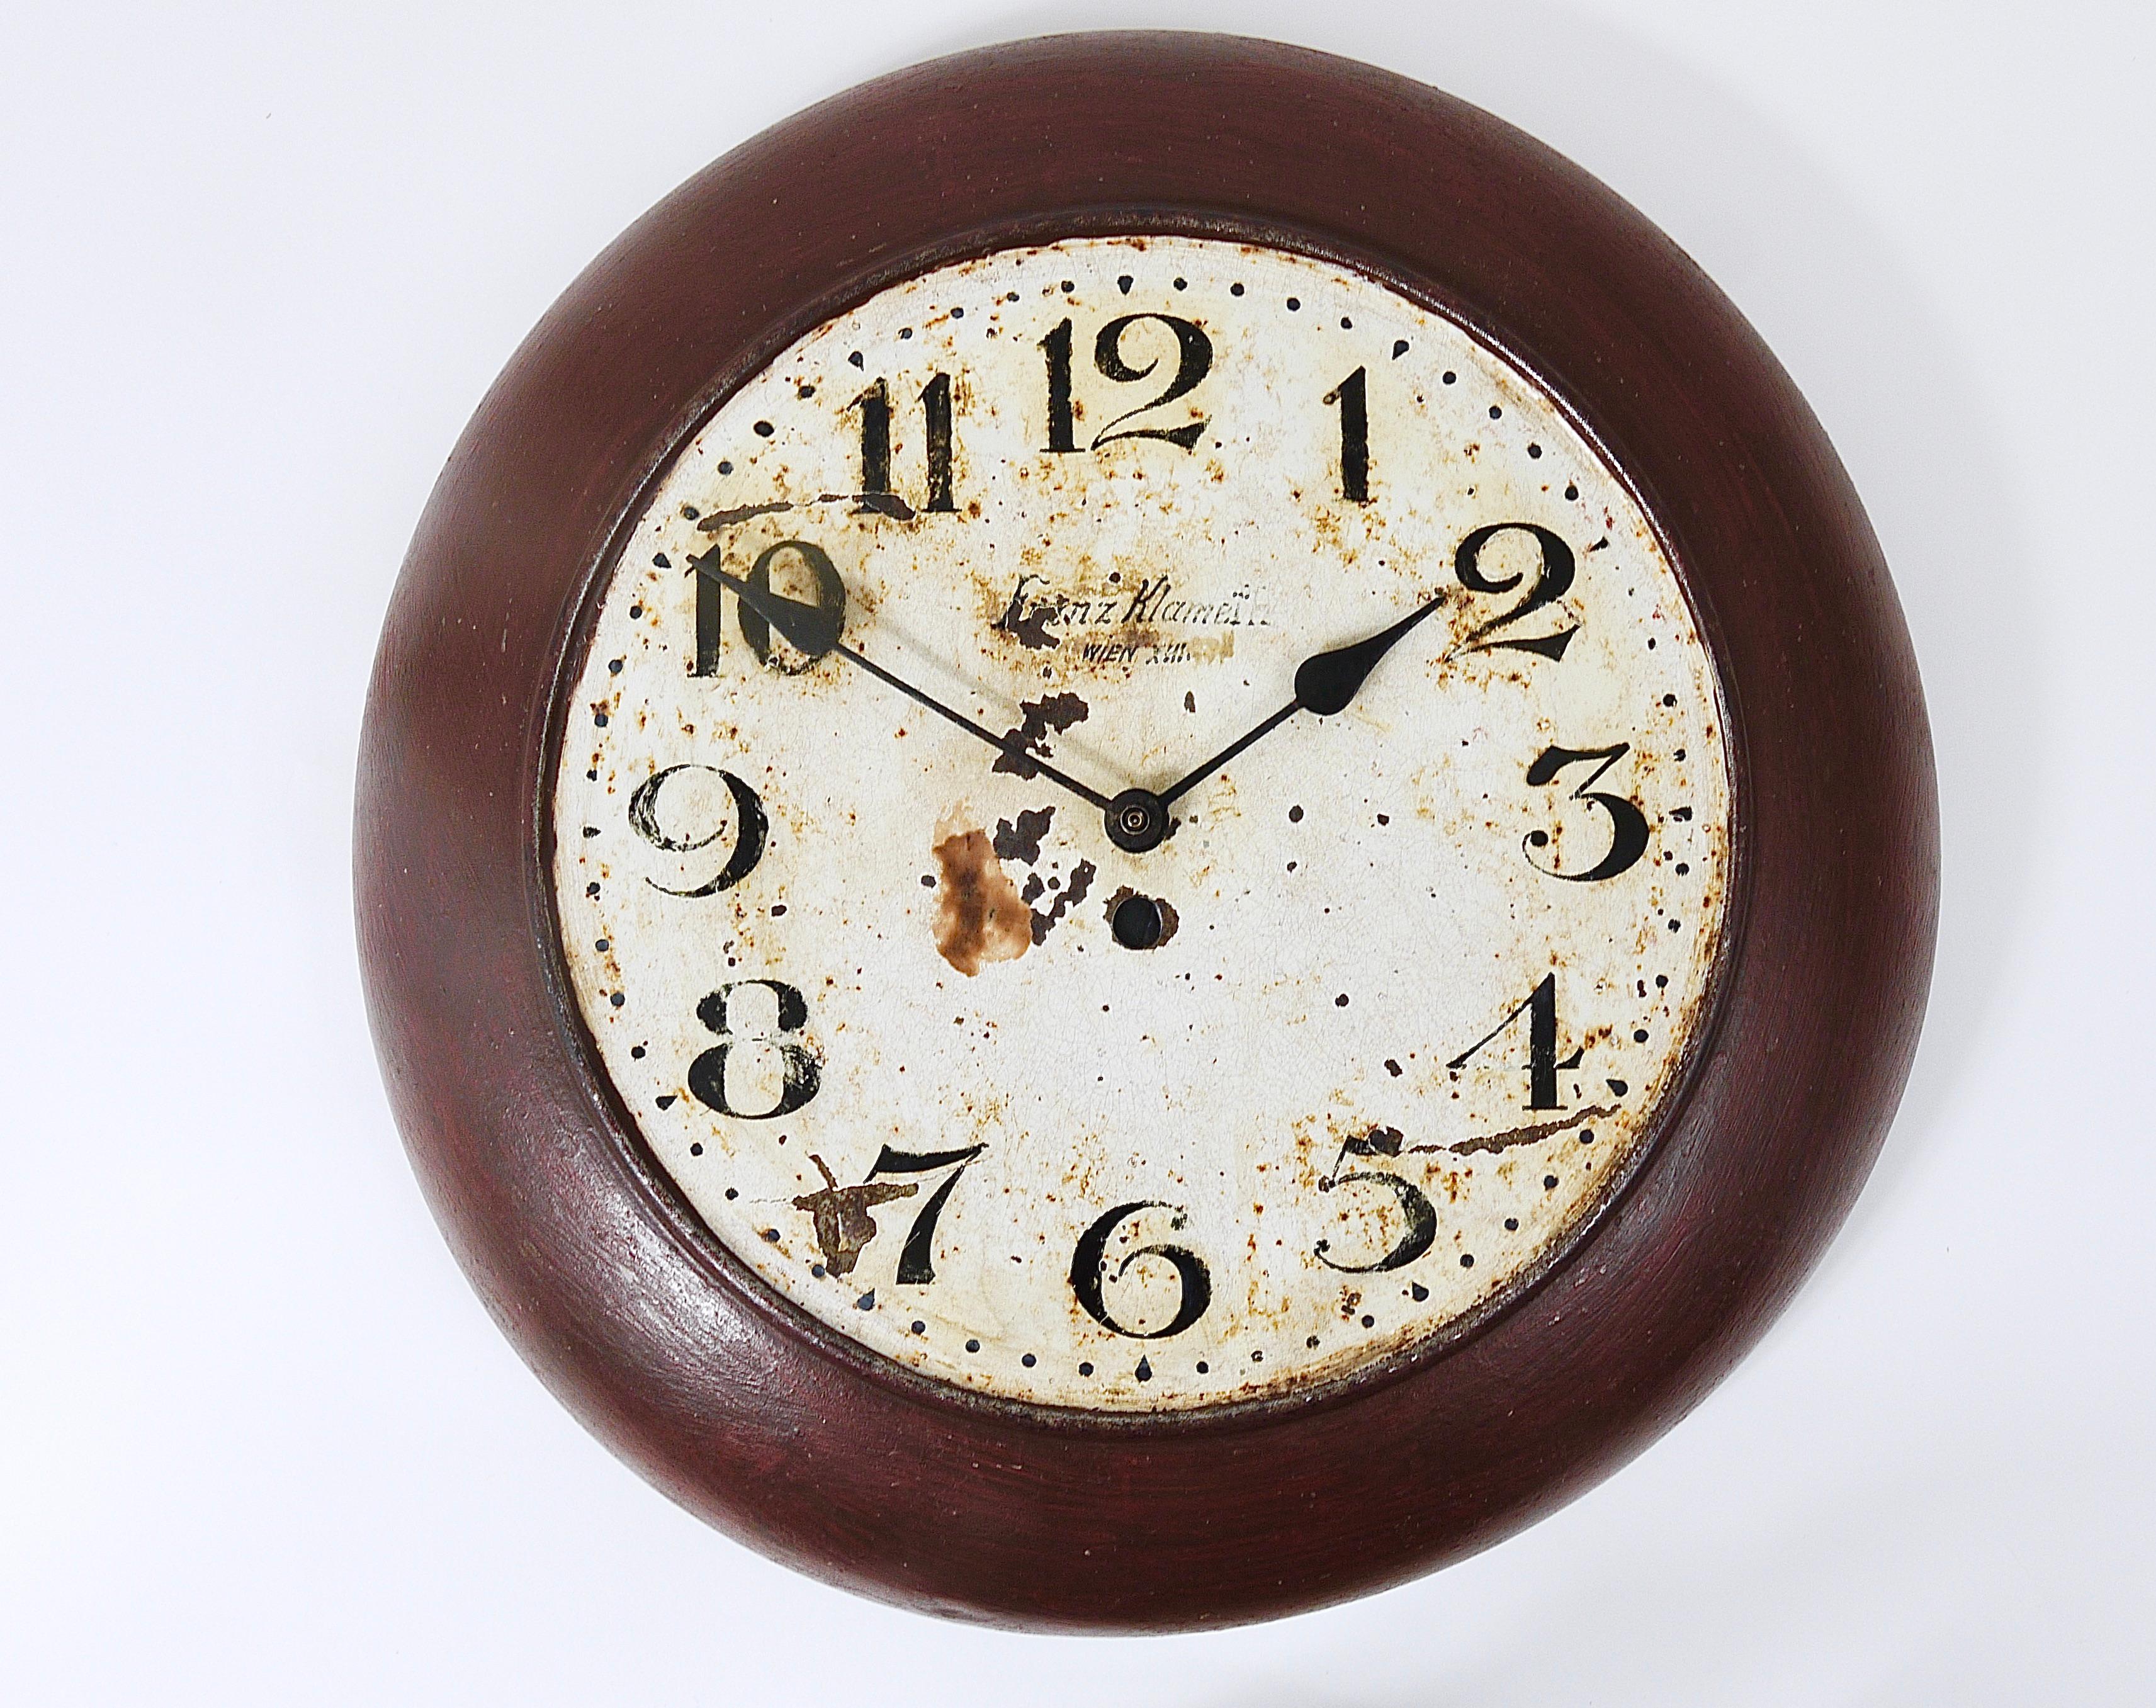 Metal Antique 1920s Public Iron Wall Clock With Hand-Painted Dial, Industrial Style For Sale